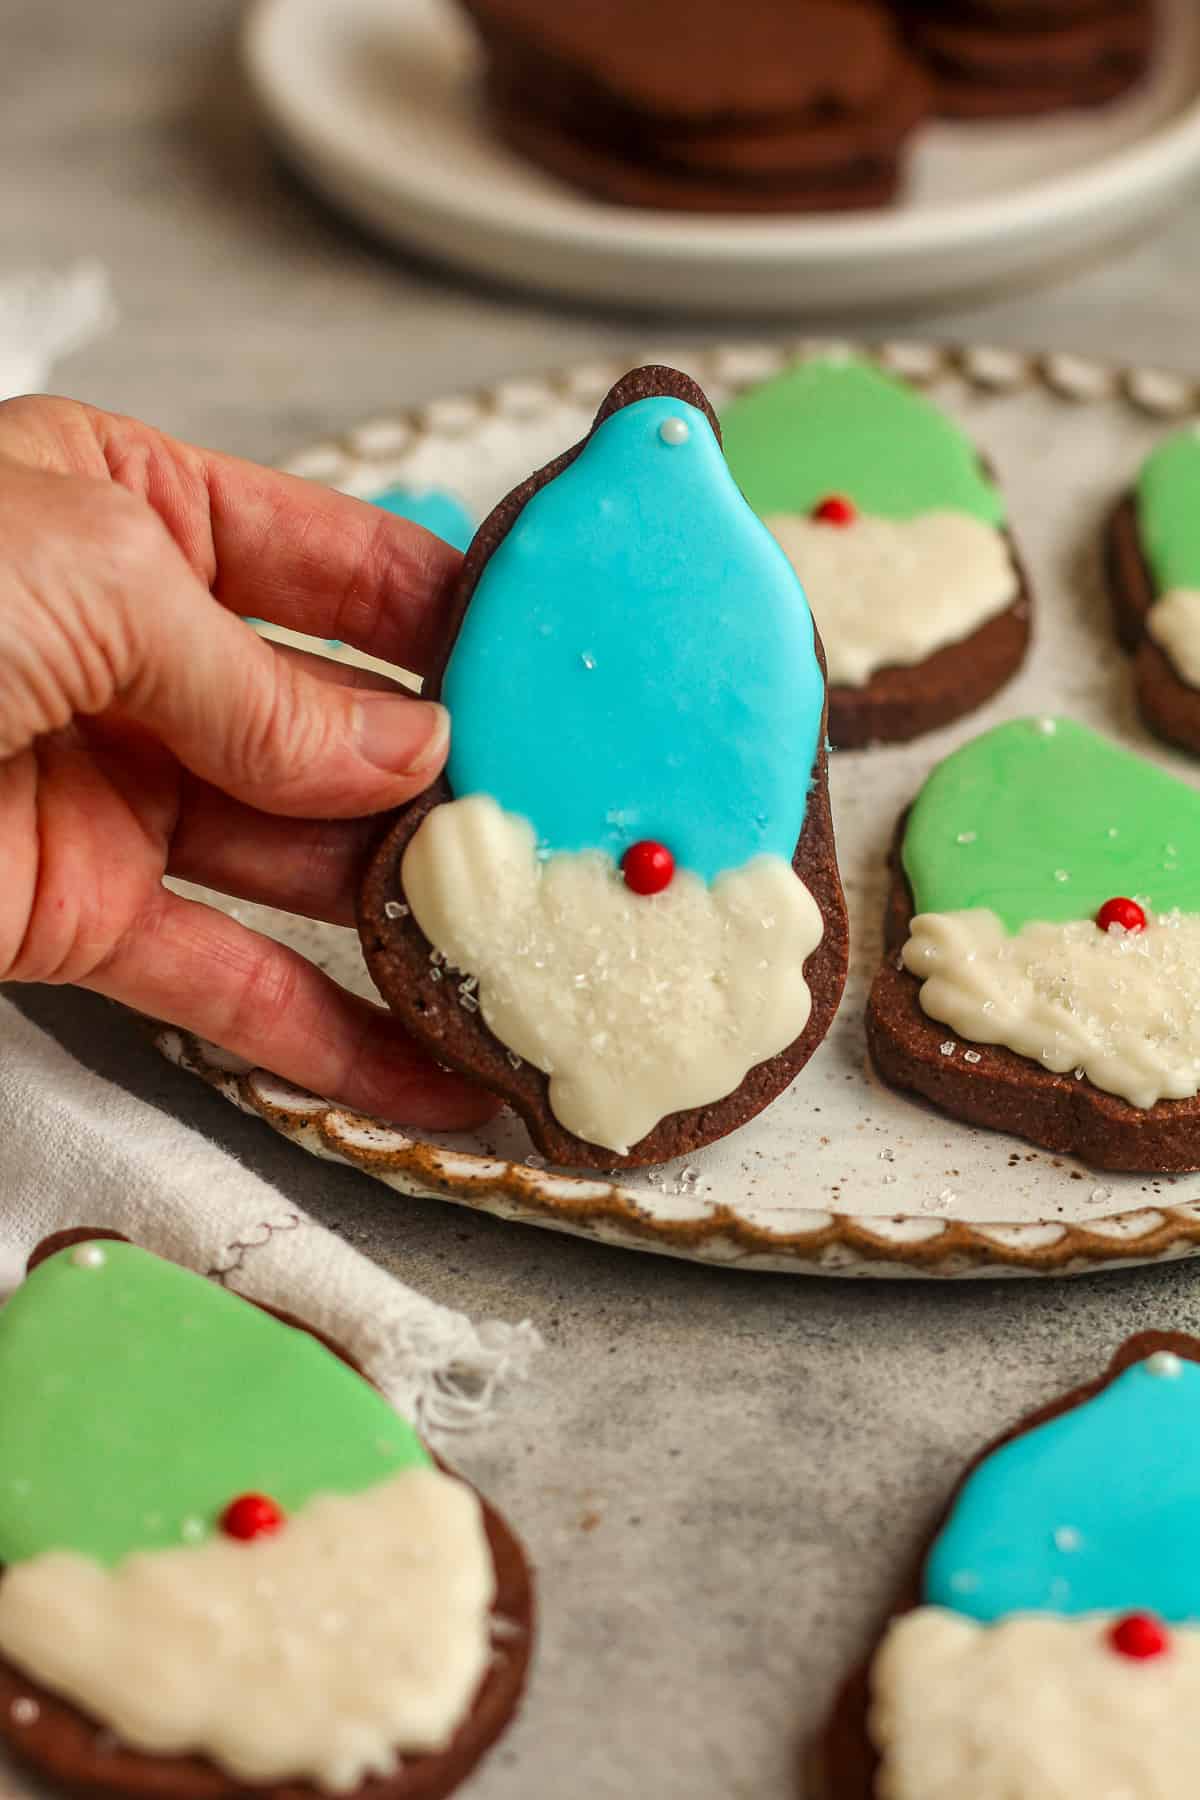 Side view of a pate of cookies with my hand holding one gnome cookie with a blue hat.